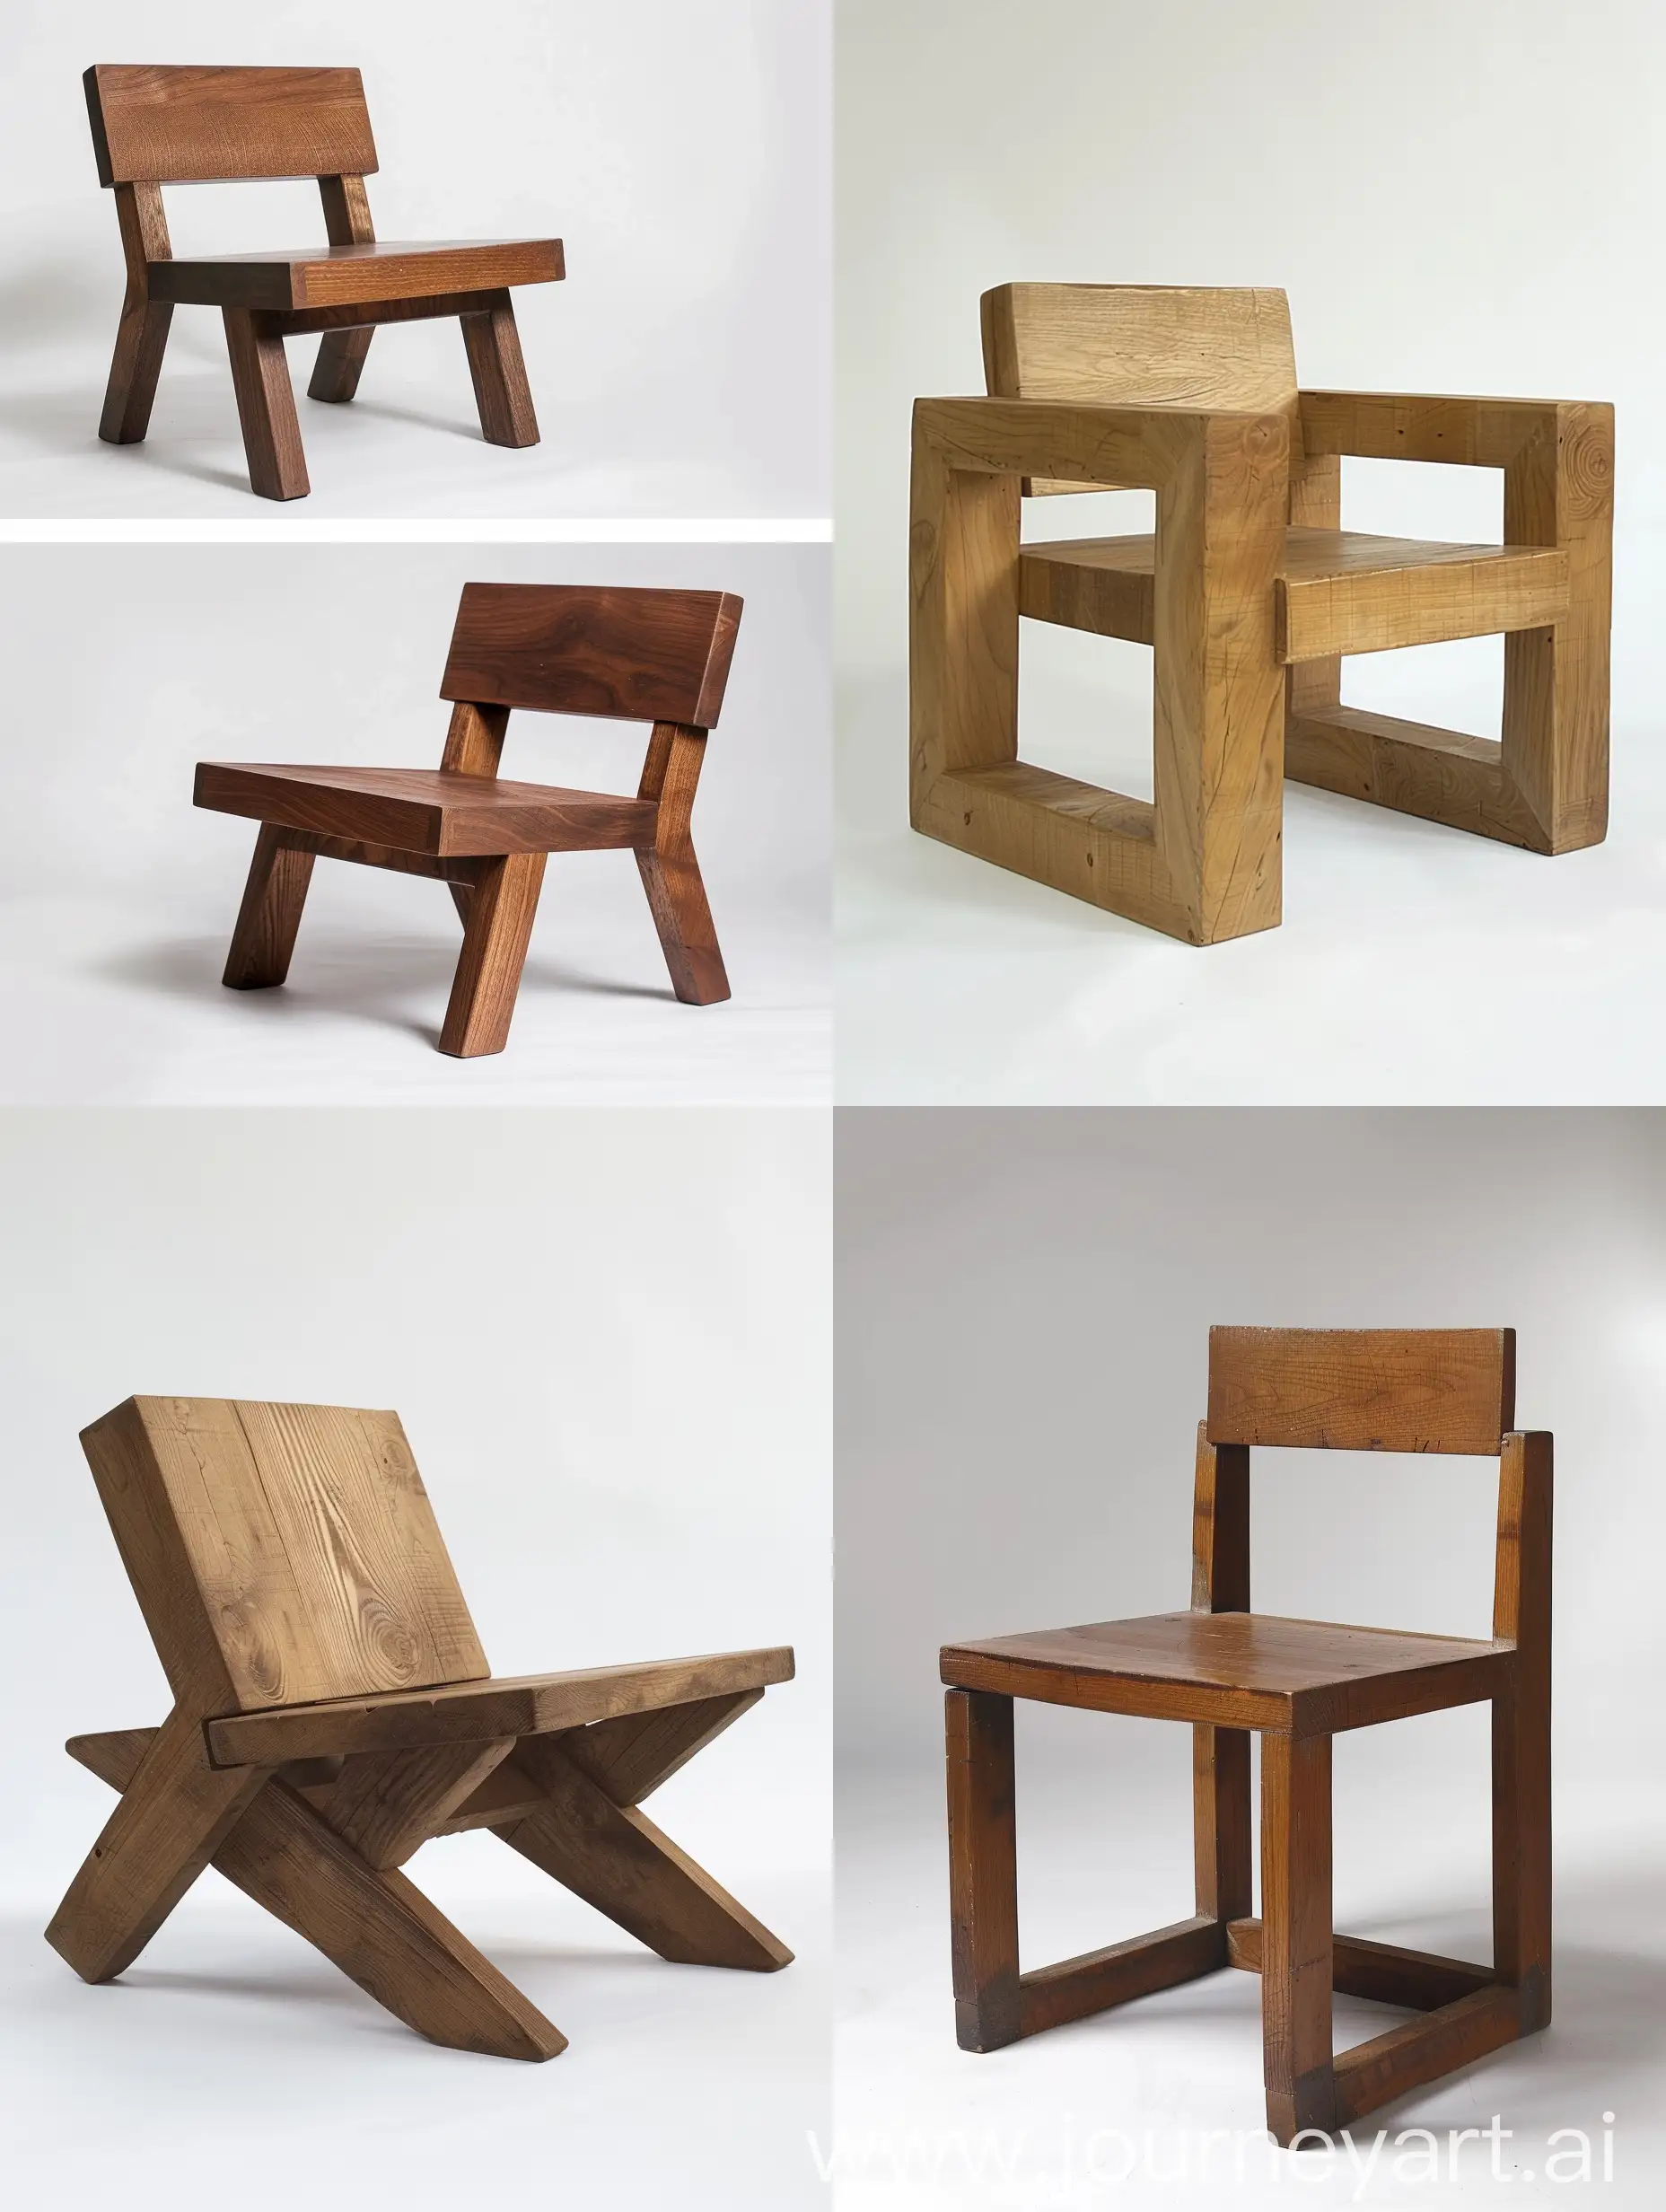 Minimalist-Wooden-Chair-Design-with-Modern-Aesthetic